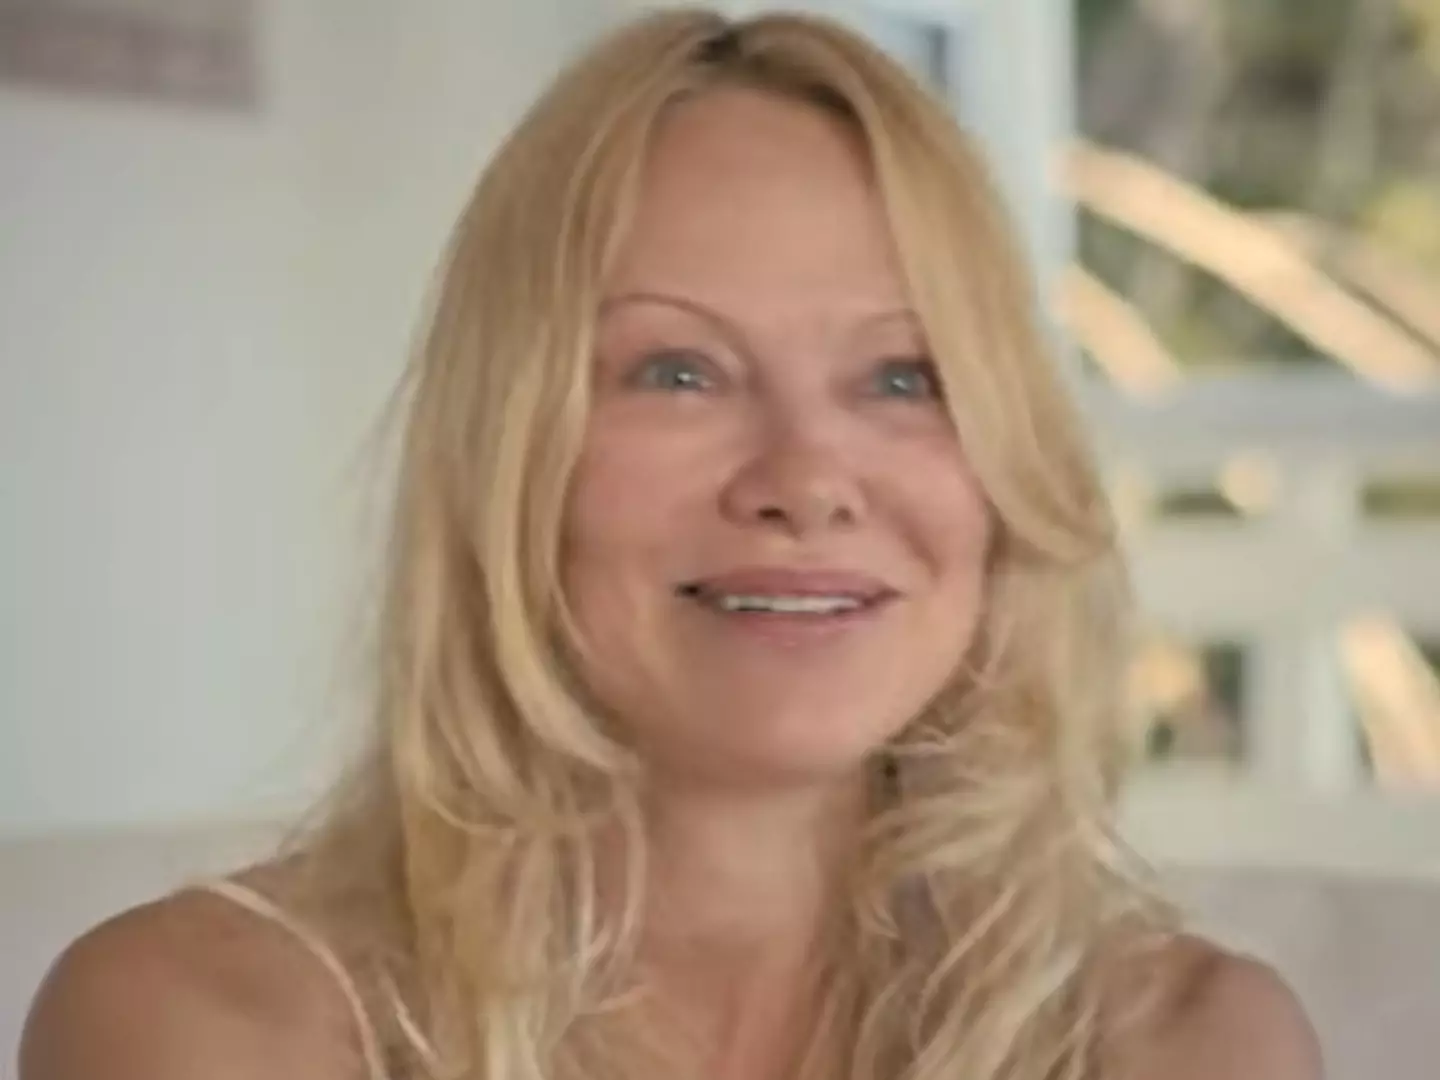 Pamela Anderson has made a Netflix documentary about her life.